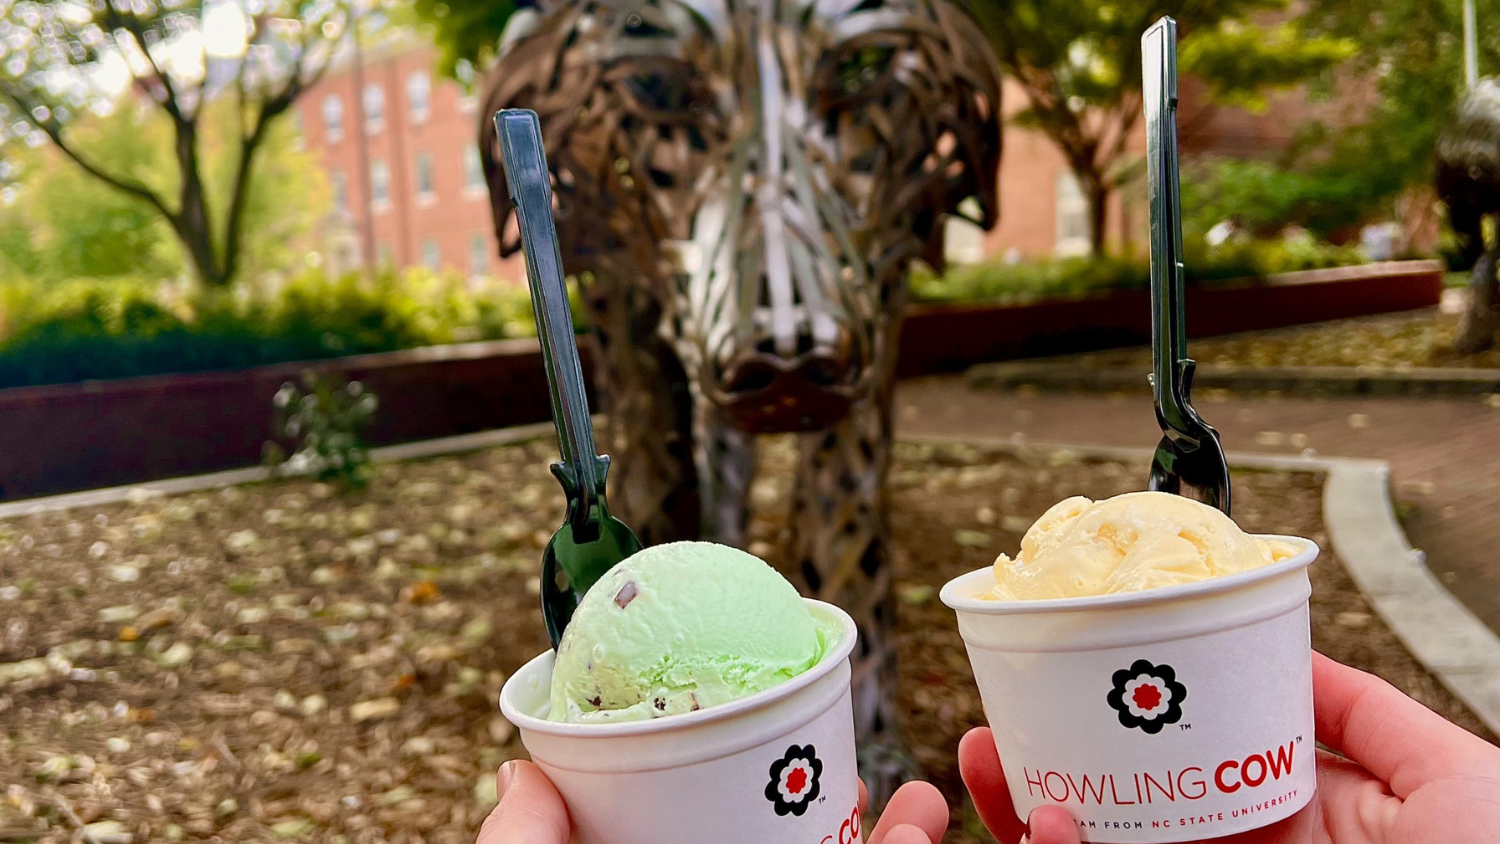 Howling Cow Ice Cream by Talley wolves.